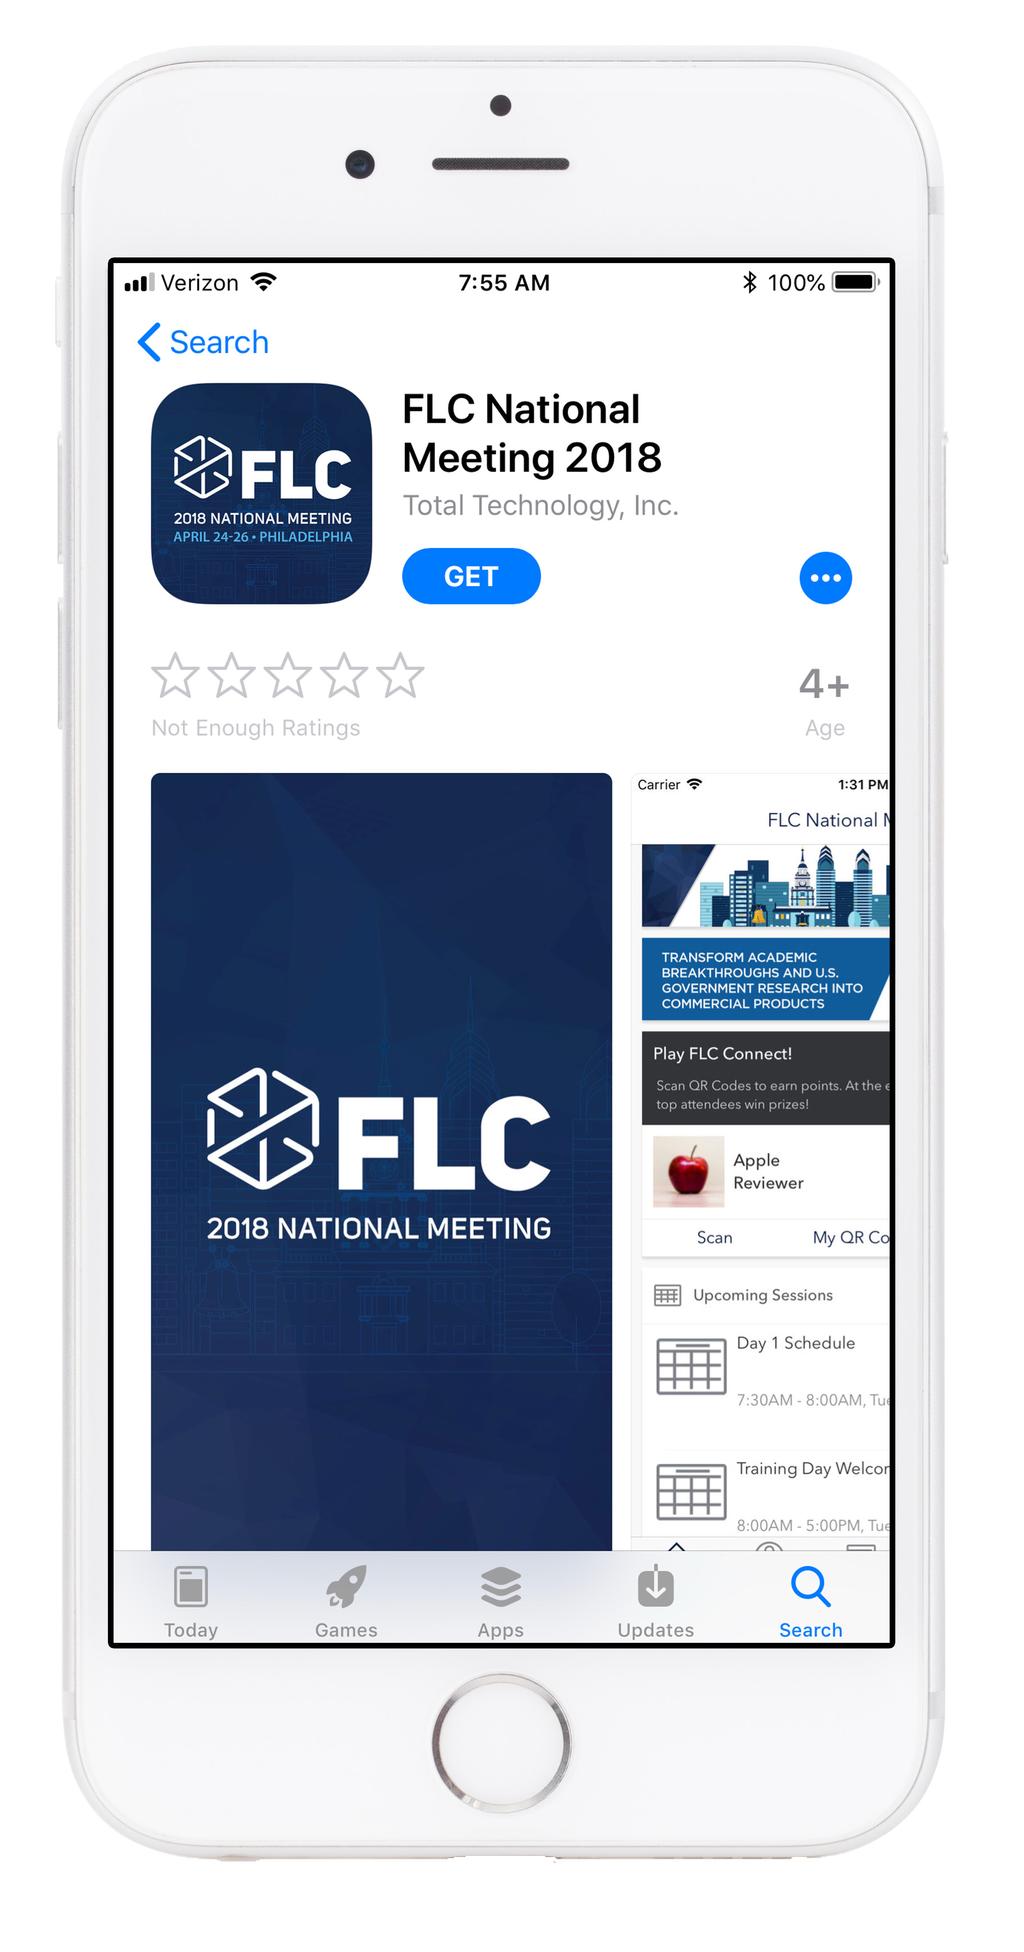 DOWNLOAD THE MEETING APP The national meeting mobile app keeps you informed and up-to-date on the latest meeting info.